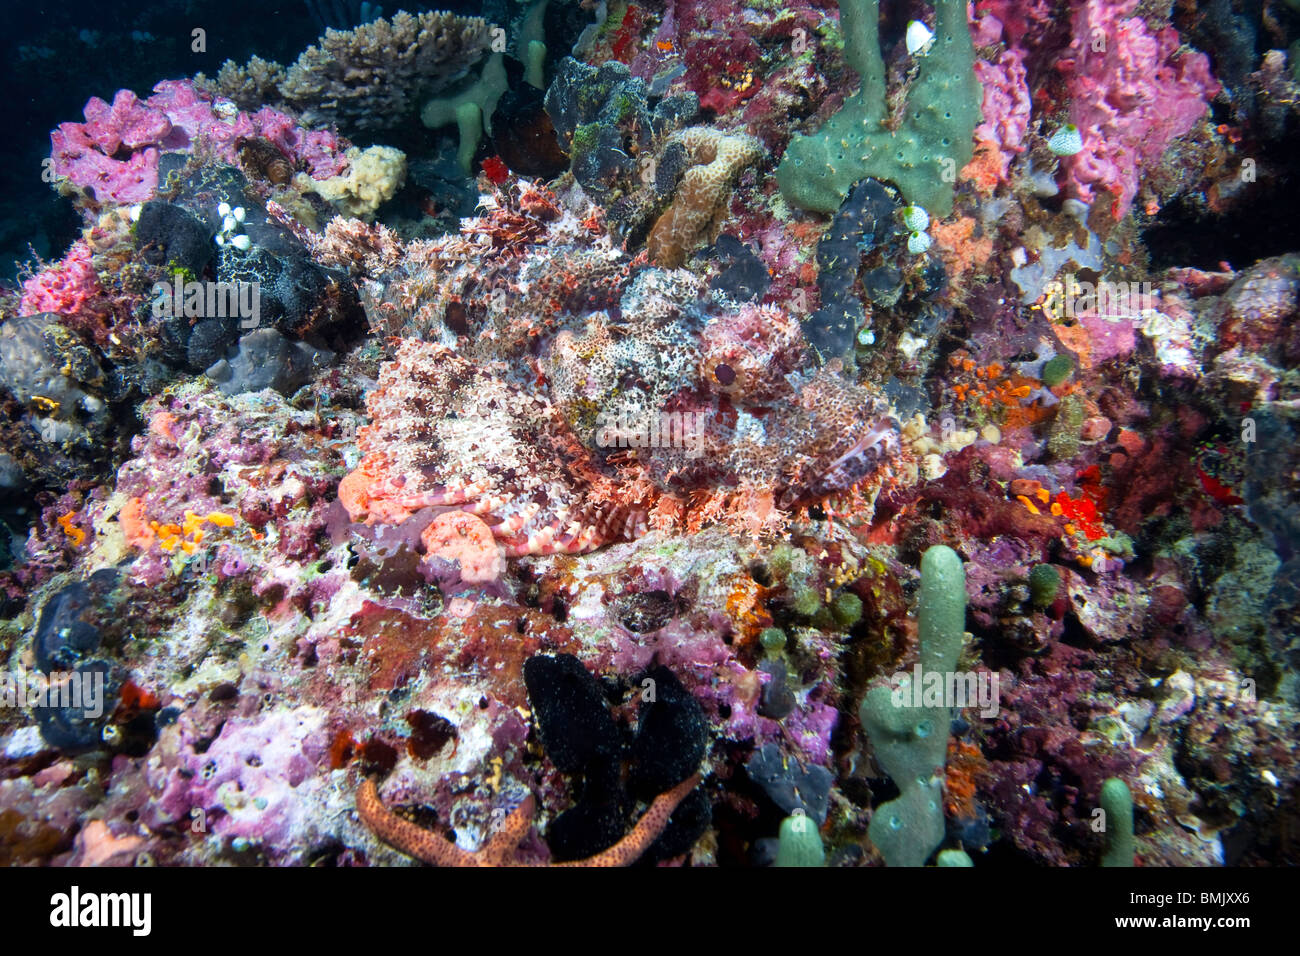 Scorpionfish (Scorpaenidae) well camouflaged in a coral reef in the Maldives Stock Photo